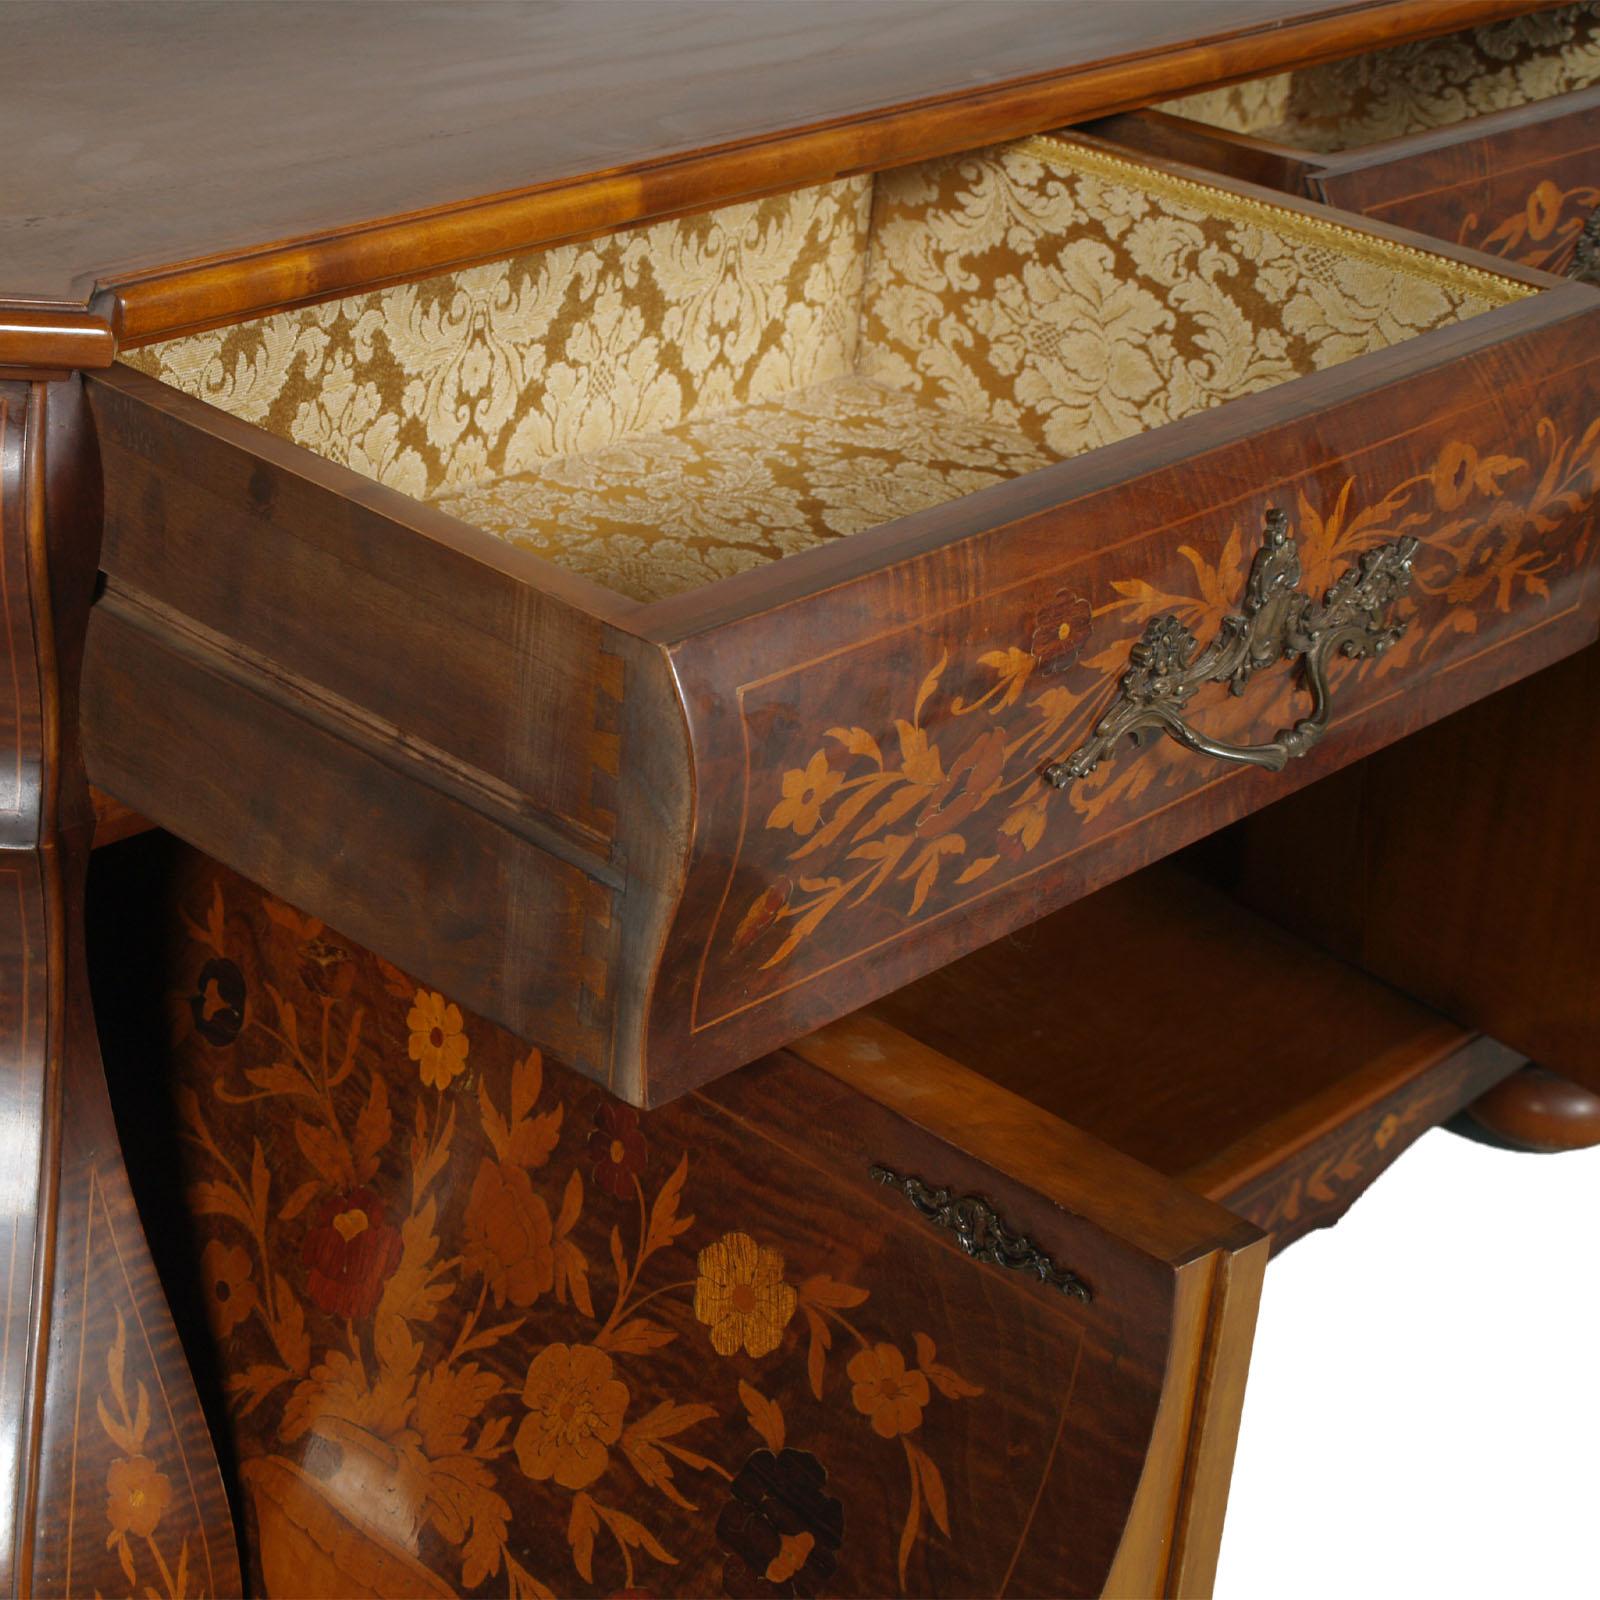 1930s Venetian Walnut Baroque Sideboard and Display Cabinet Richly Floral Inlaid For Sale 6